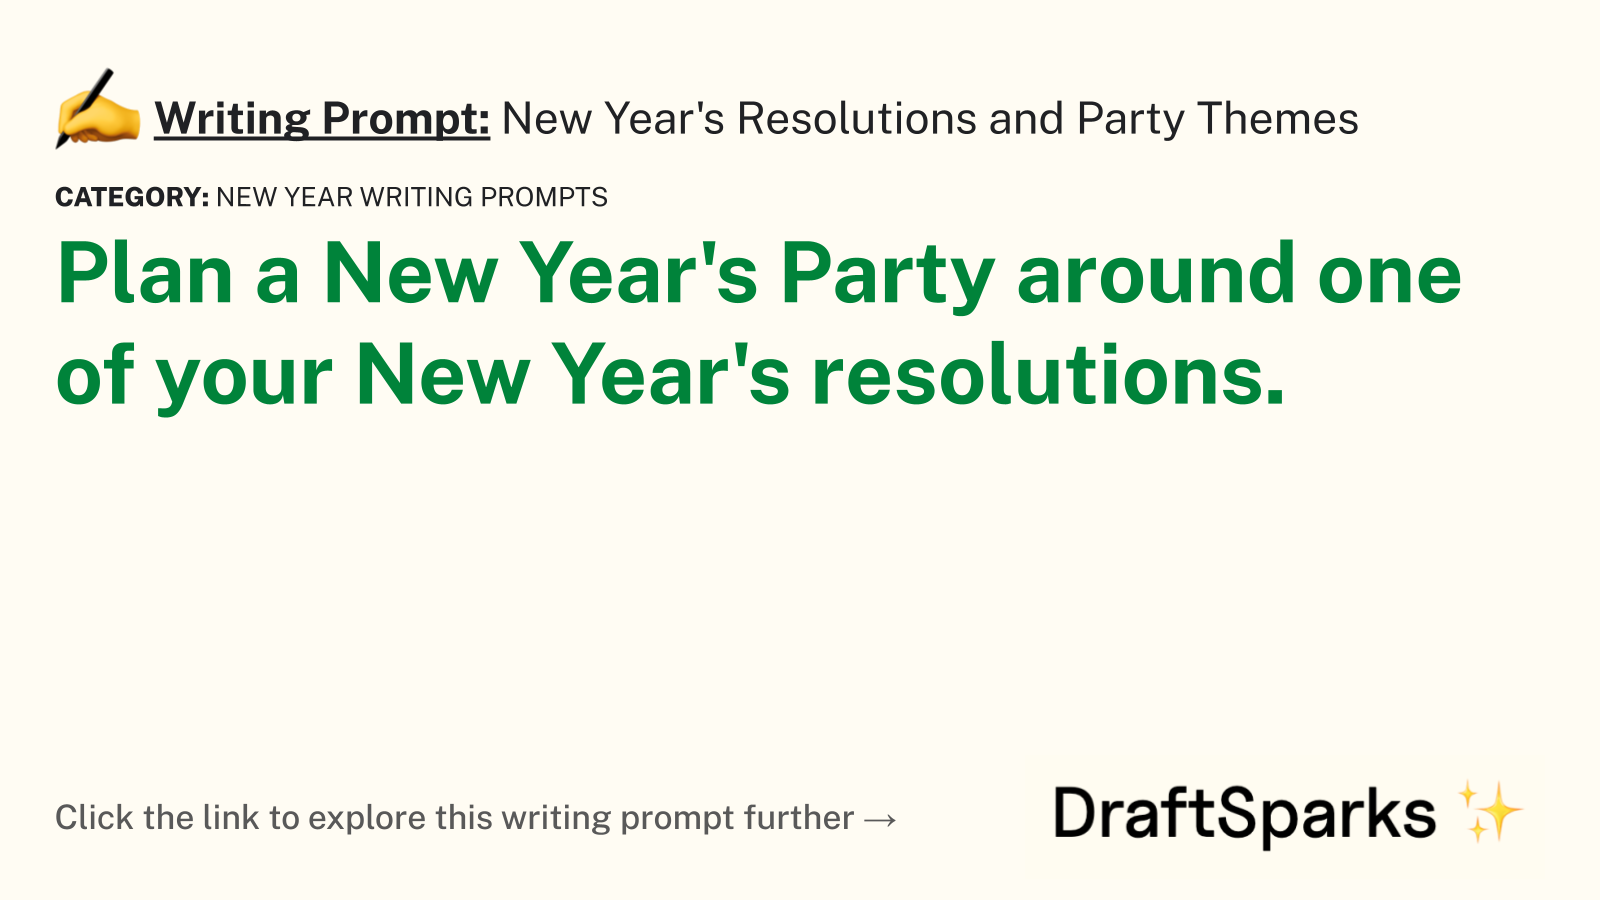 New Year’s Resolutions and Party Themes